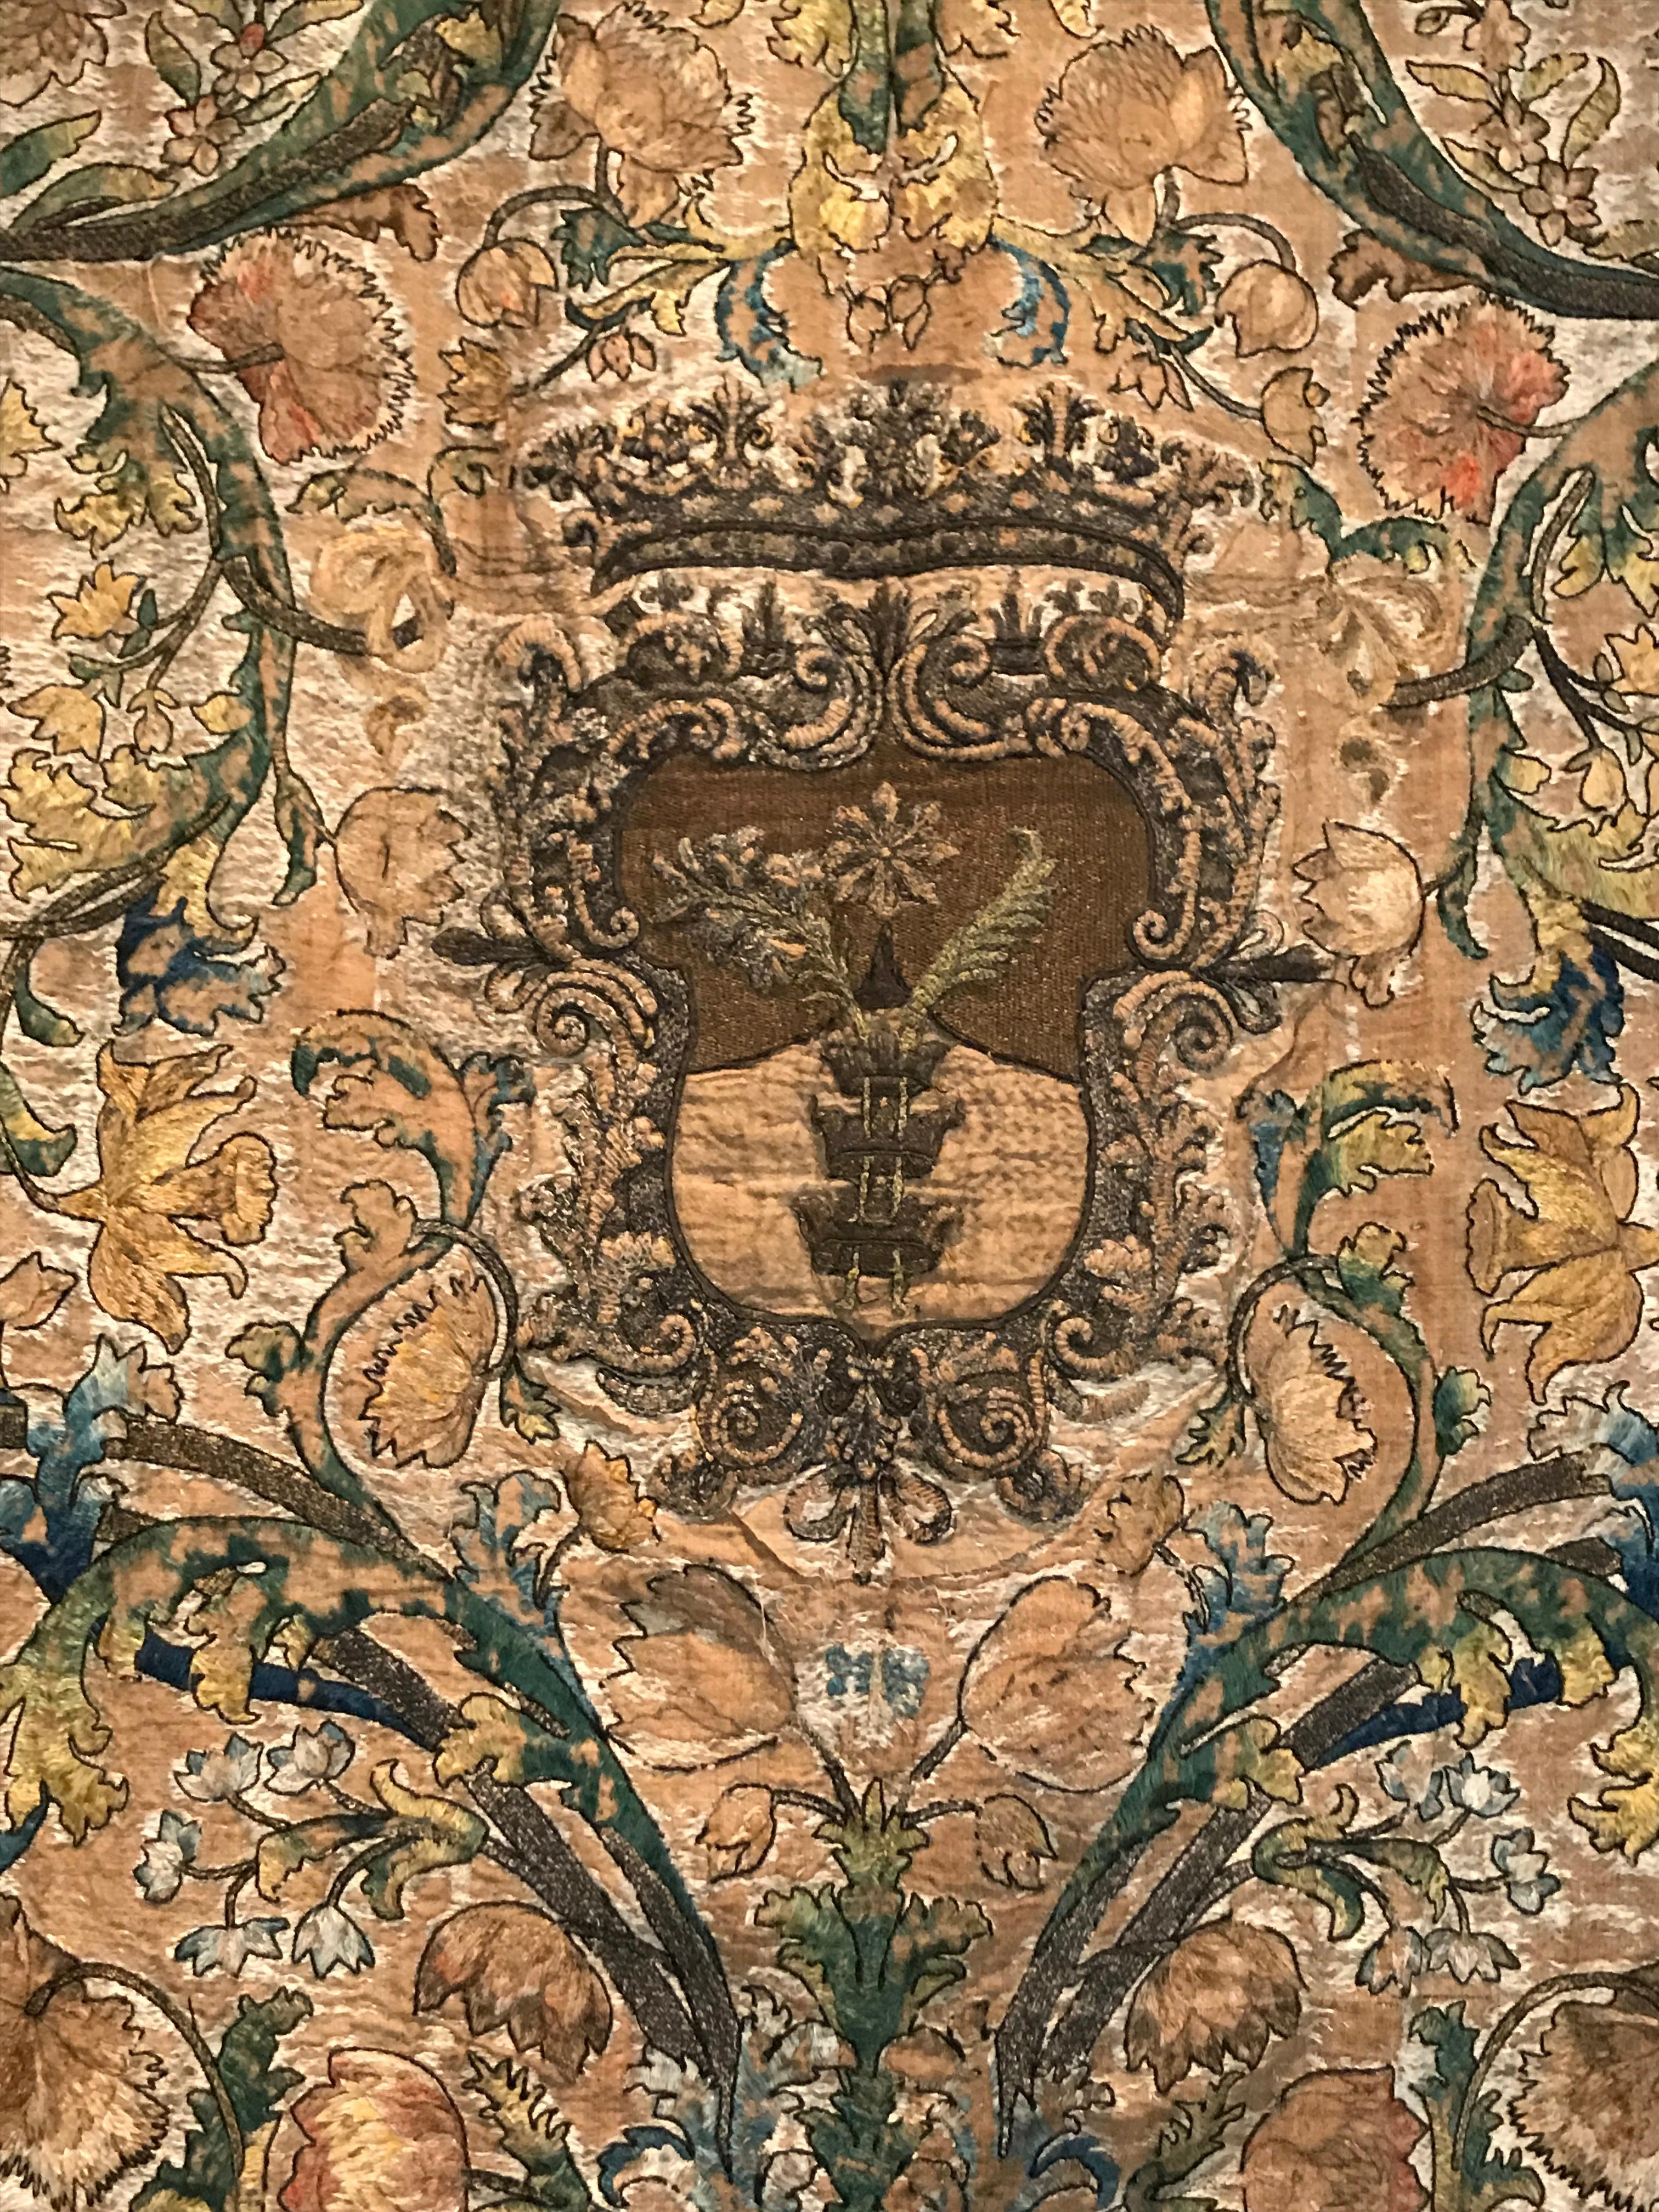 Beautiful needlework tapestry with intricate floral and vine patterns and a shield in the center. Shades of yellow, green, brown and blue with a brown border.